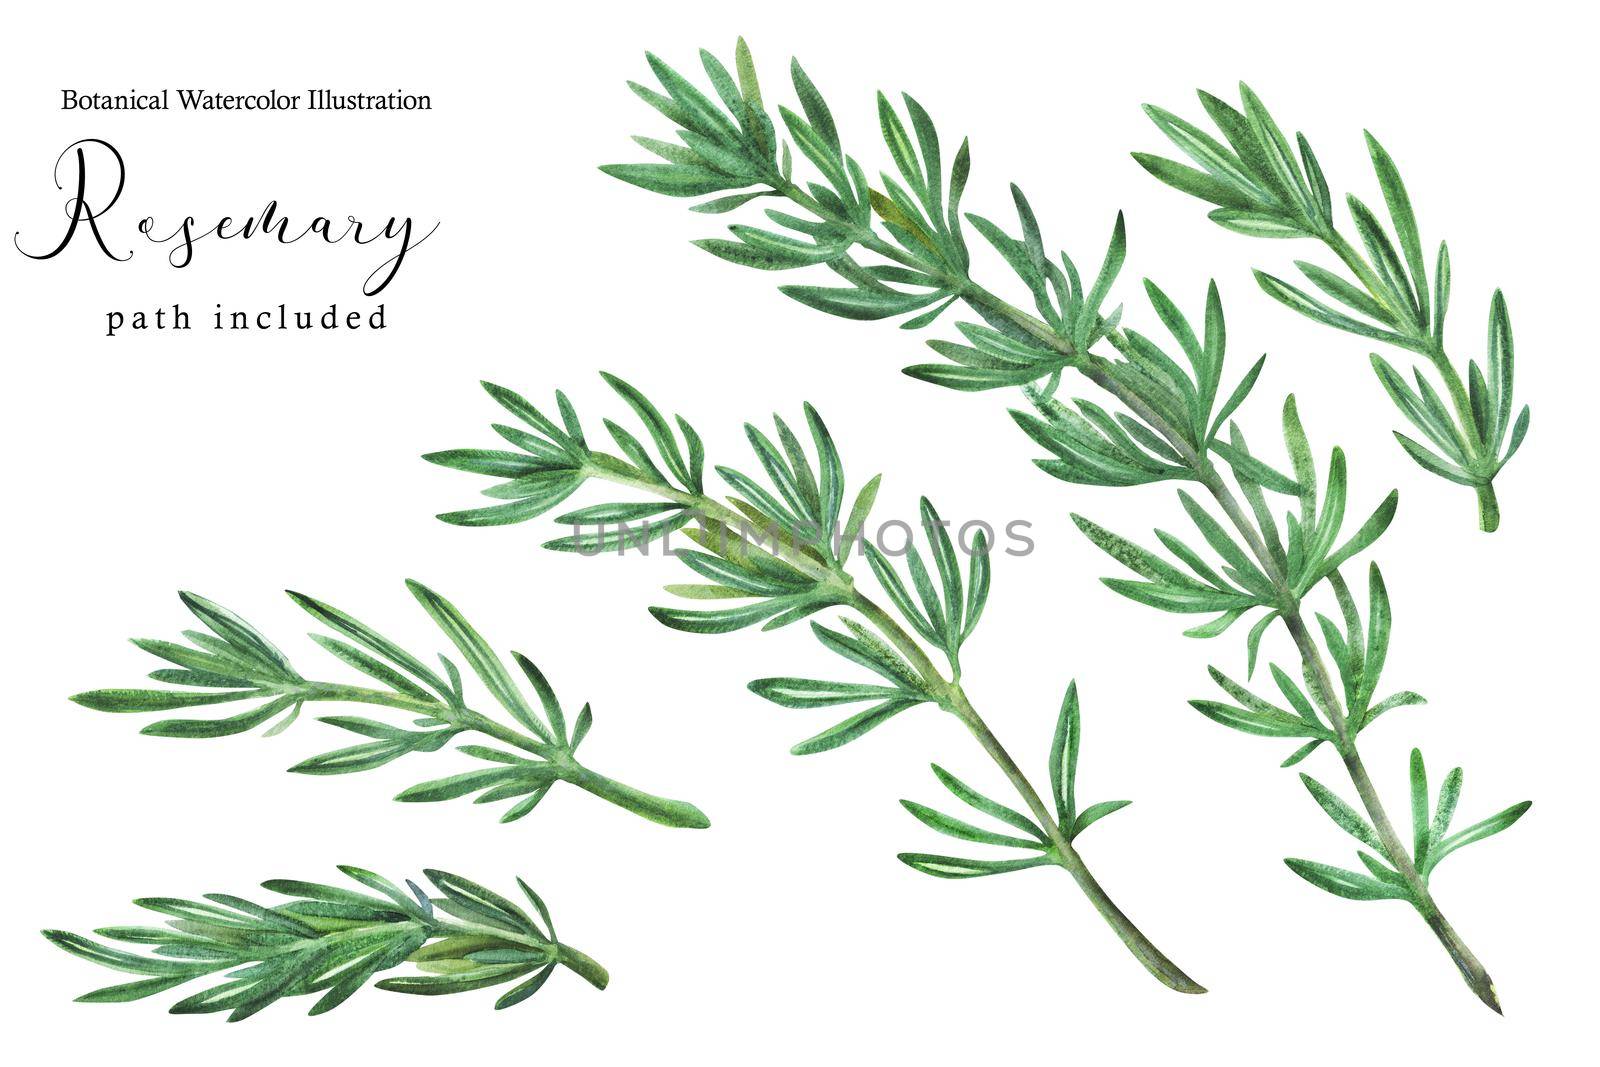 Rosemary green stem branches. Botanical watercolor illustration, path included